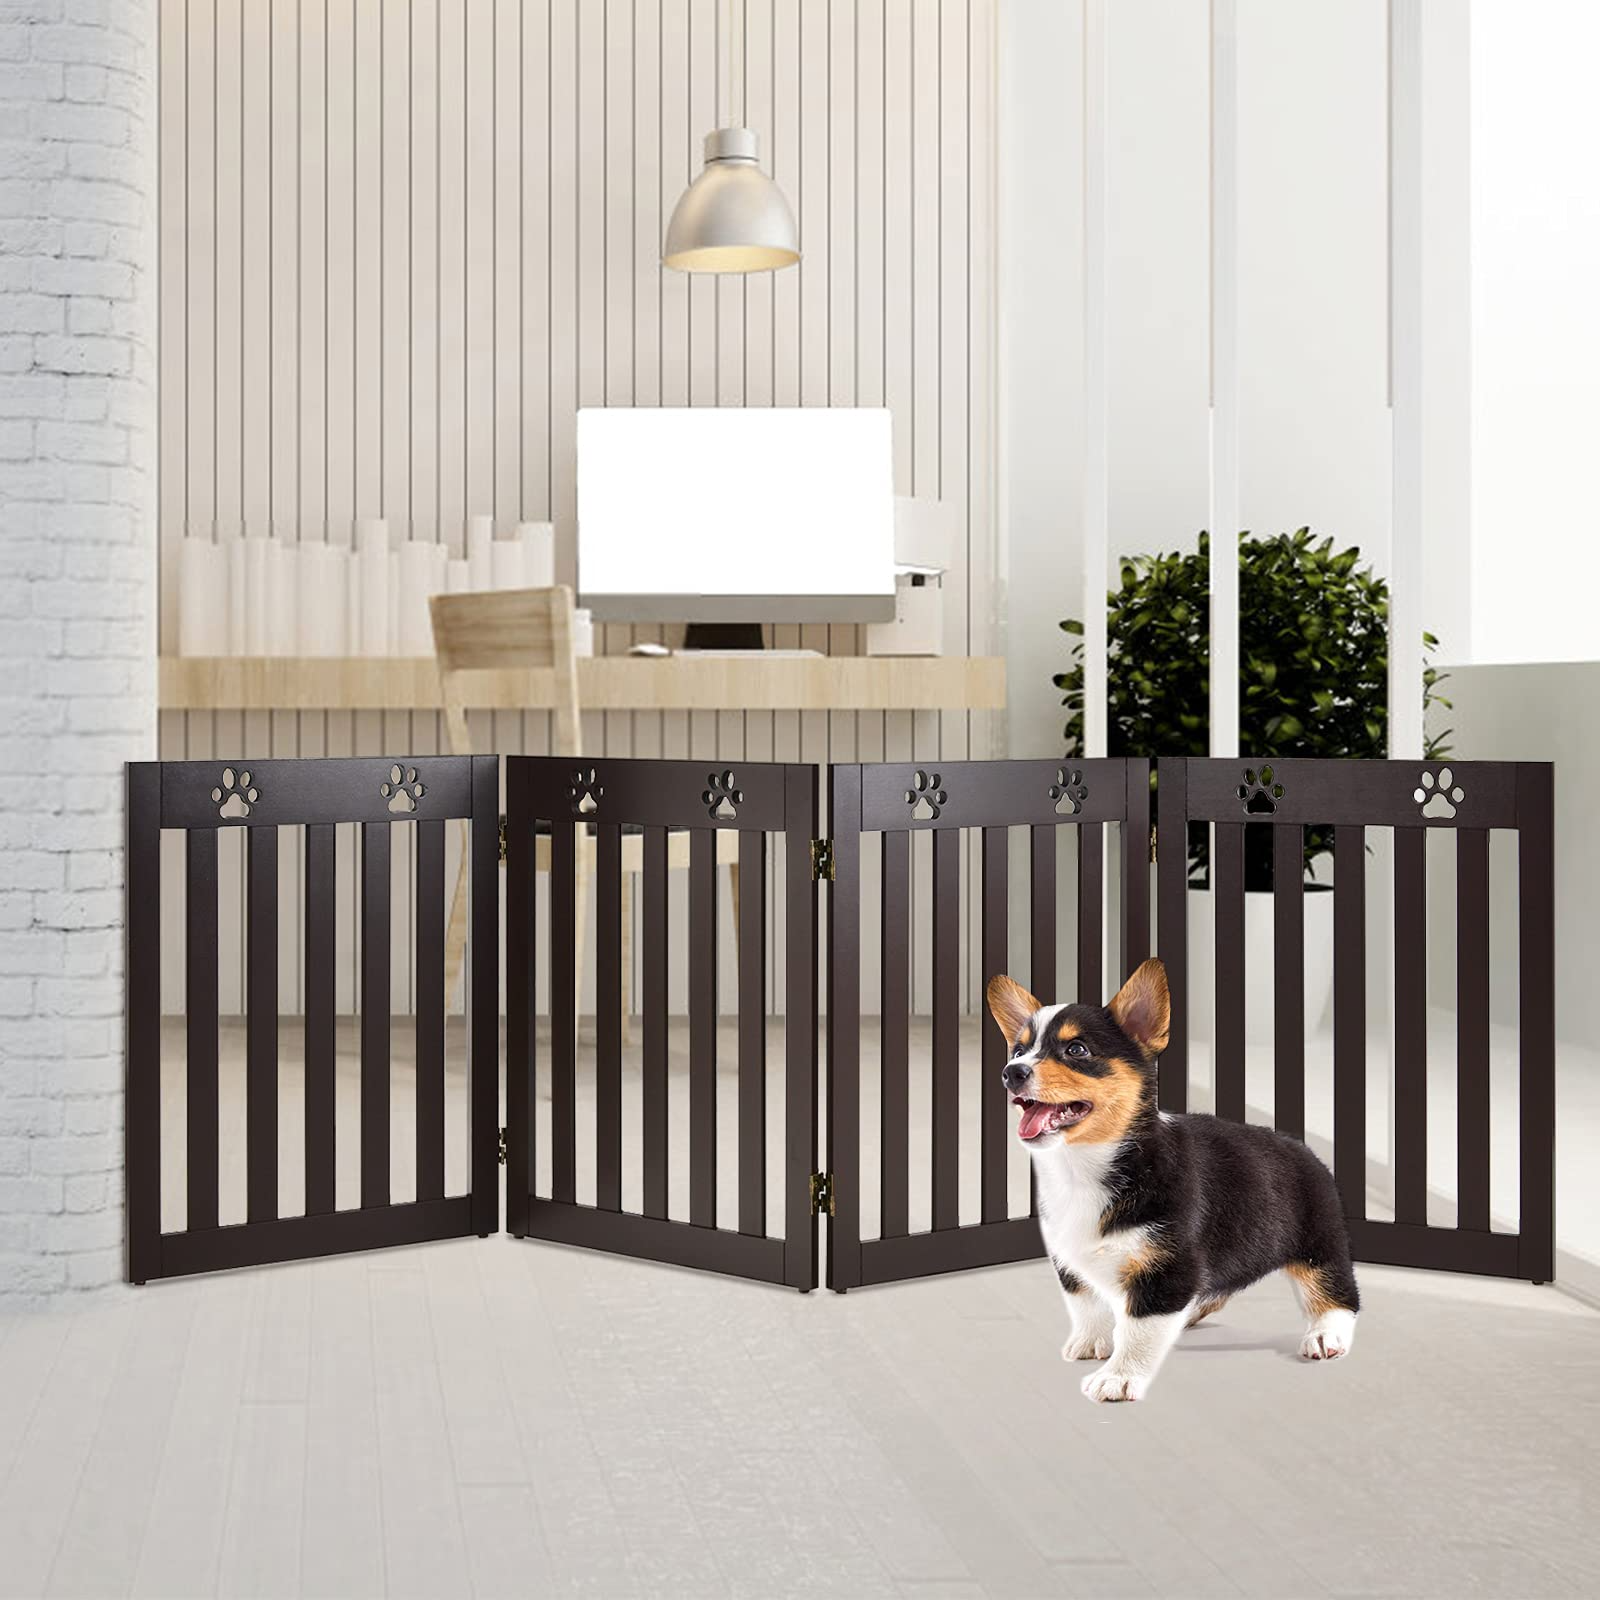 Giantex Wooden Freestanding Pet Gate, 4 Panel-24 inch Height Step Over Fence